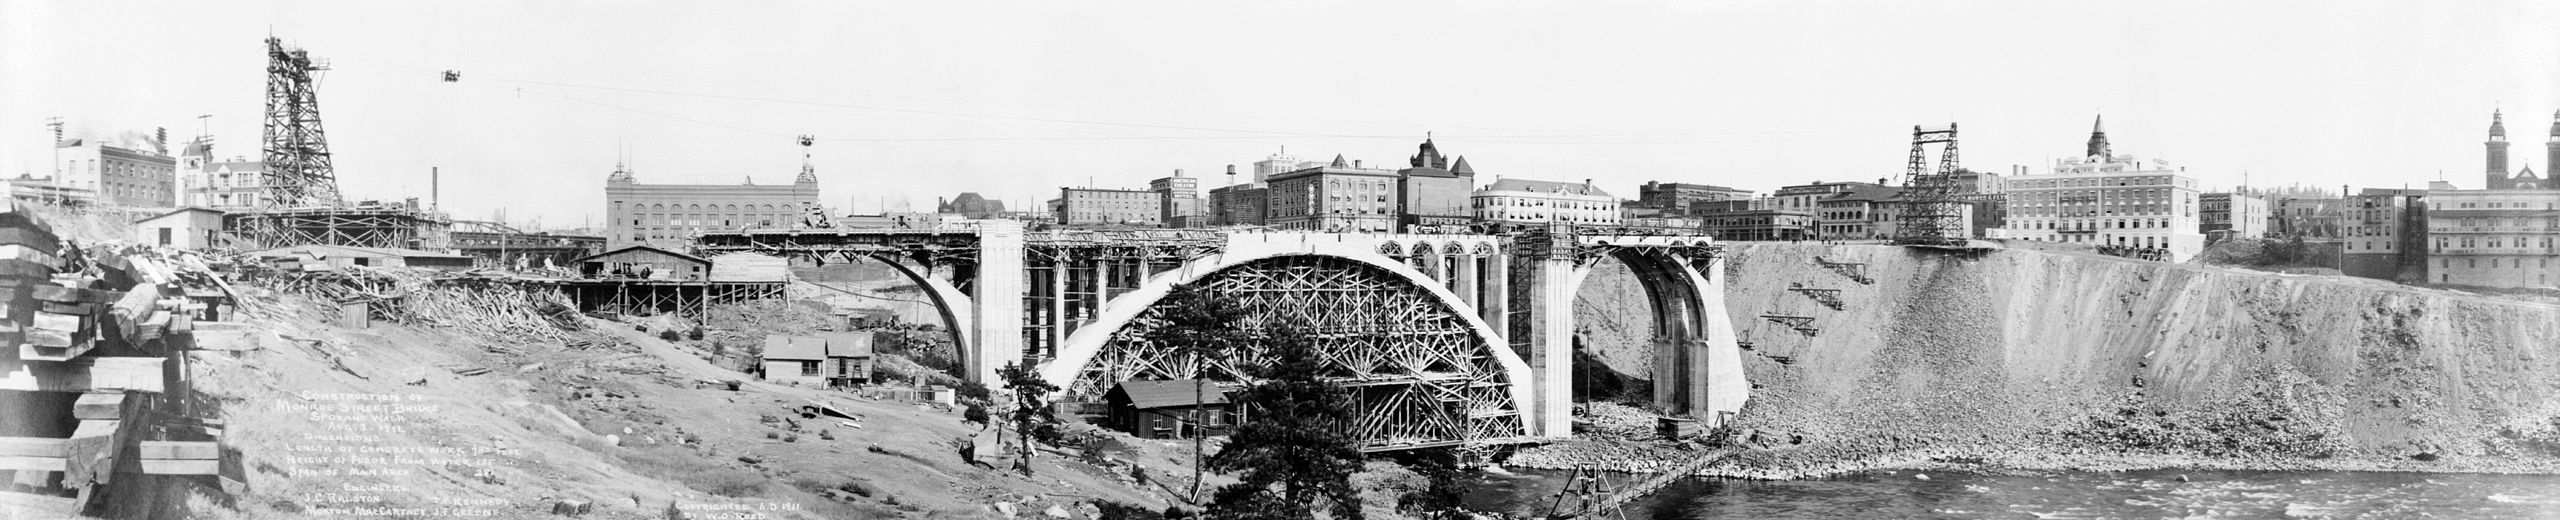 Falsework centering in the center arch of Monroe Street Bridge, Spokane, Washington, 1911. An elaborate wooden structure is supporting concrete until it can self-stand.